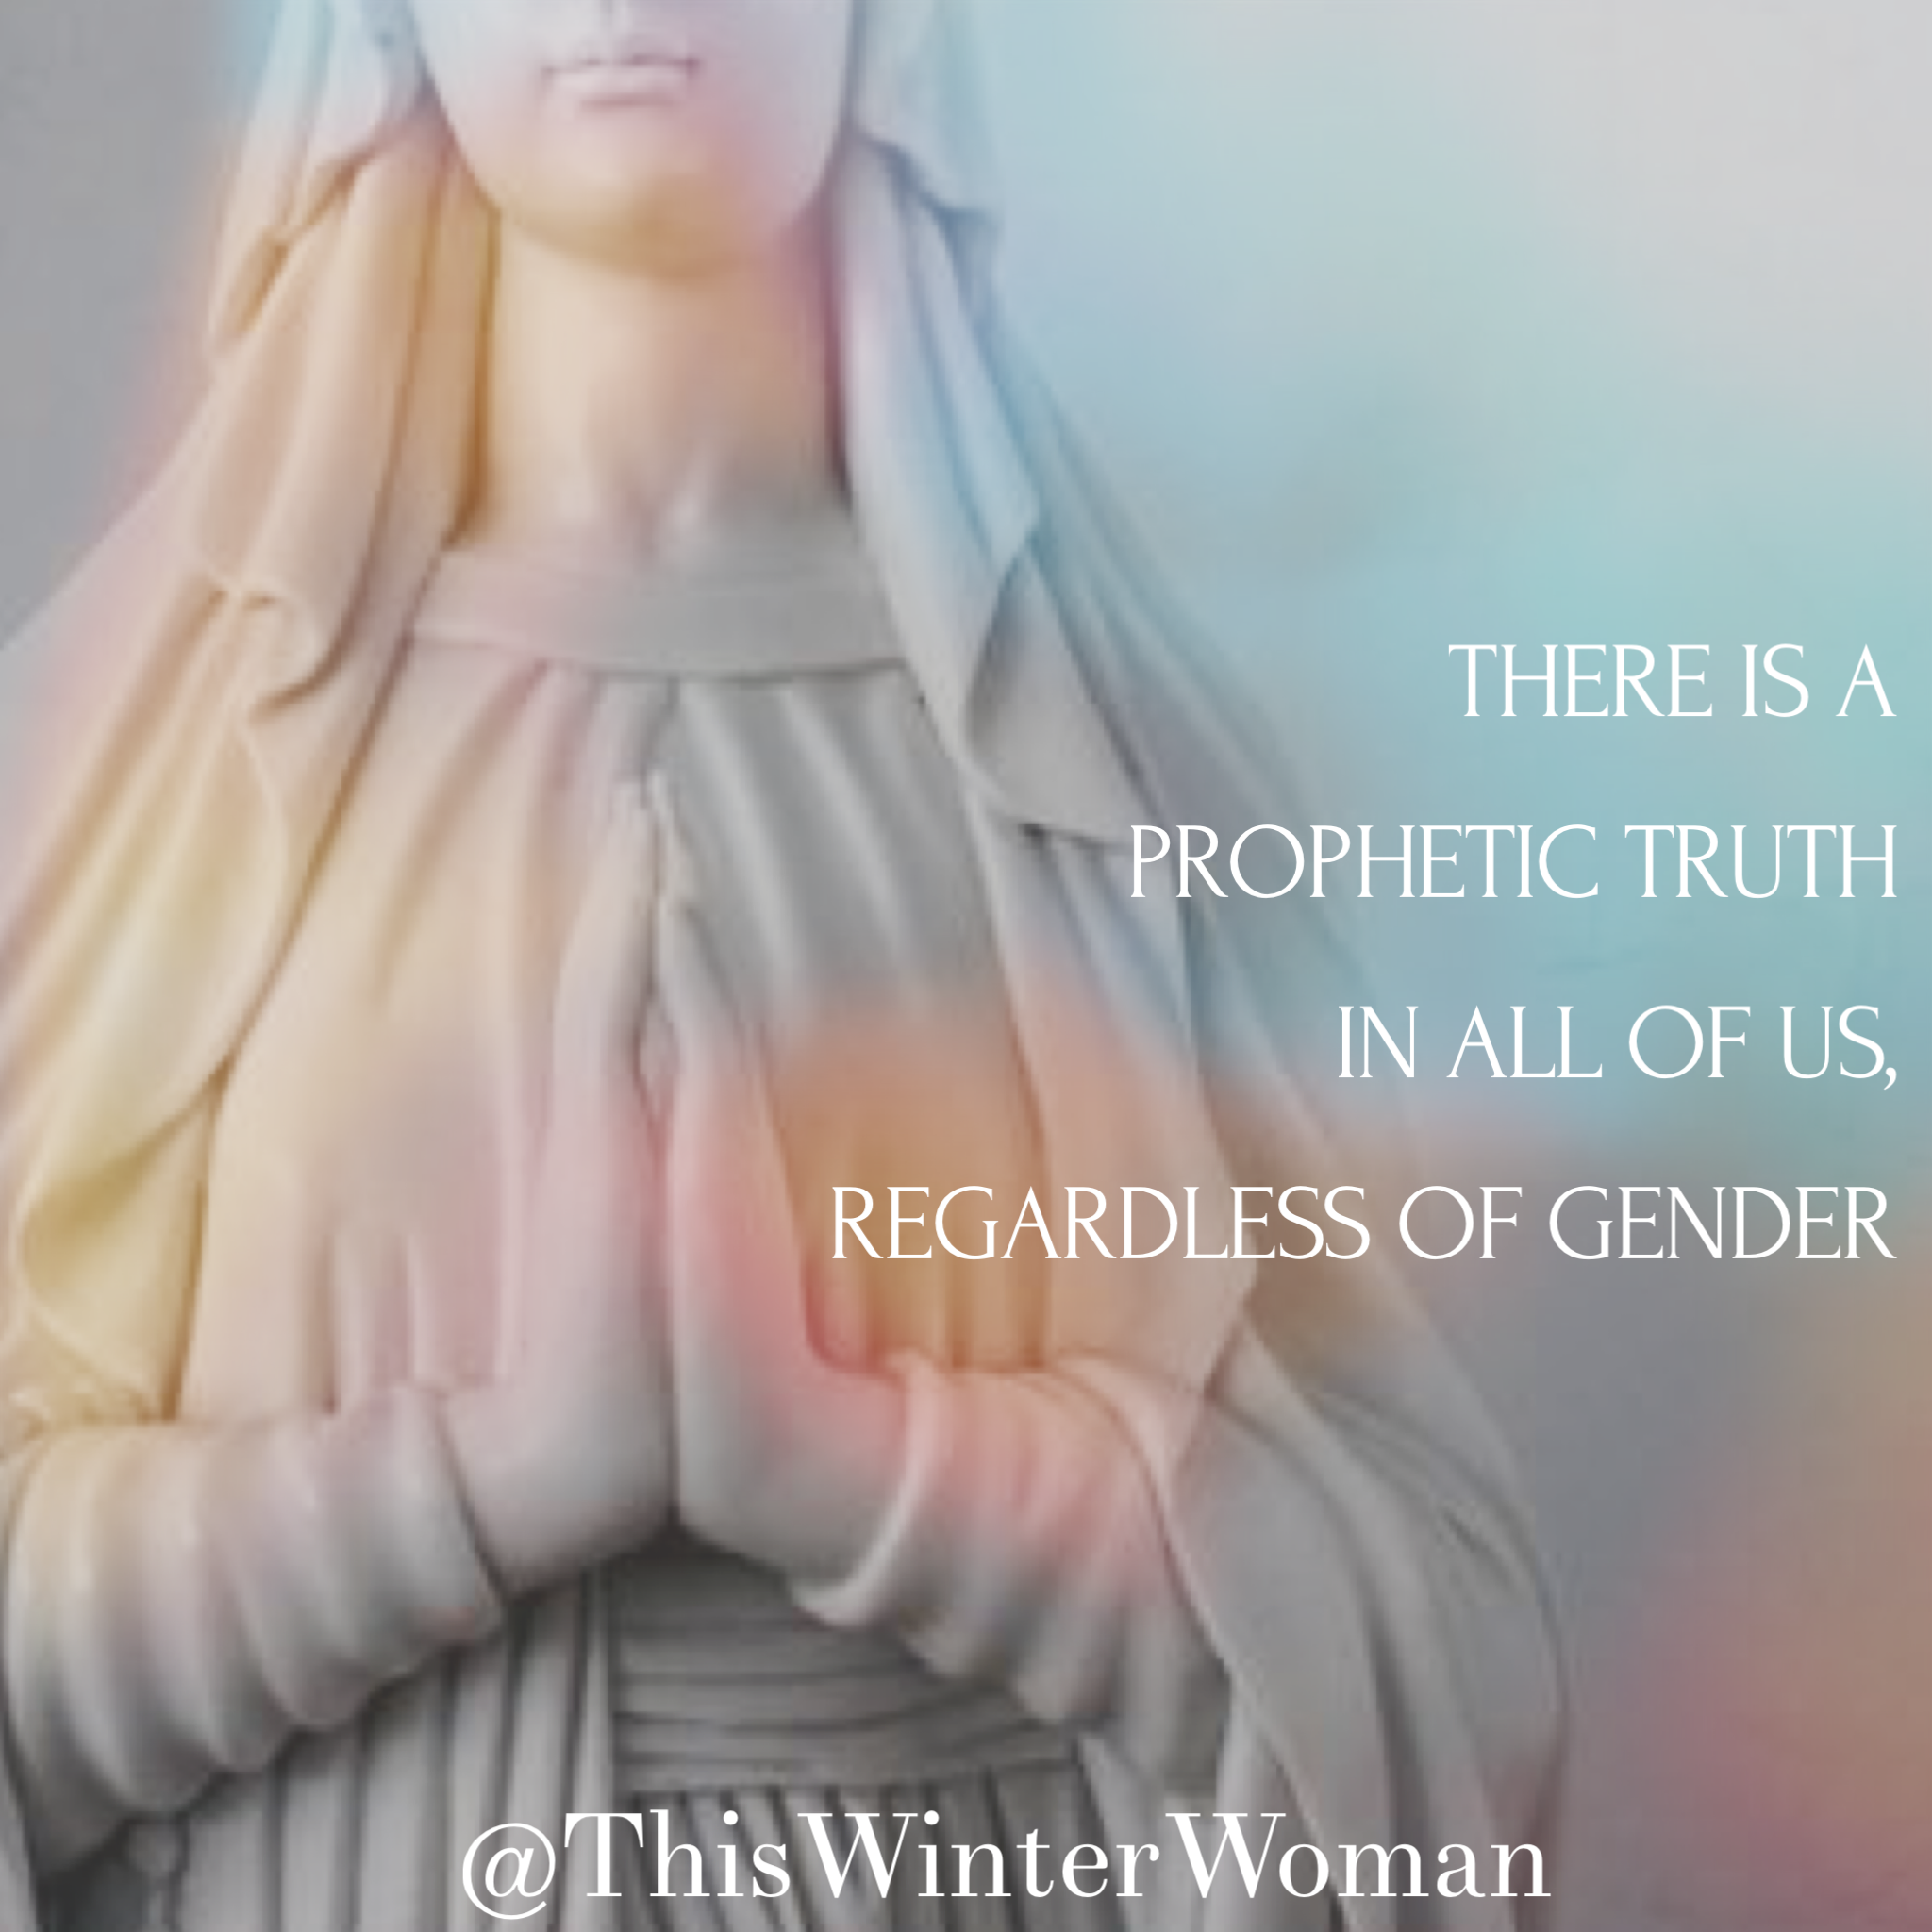 There is a prophetic truth in all of us, regardless of gender